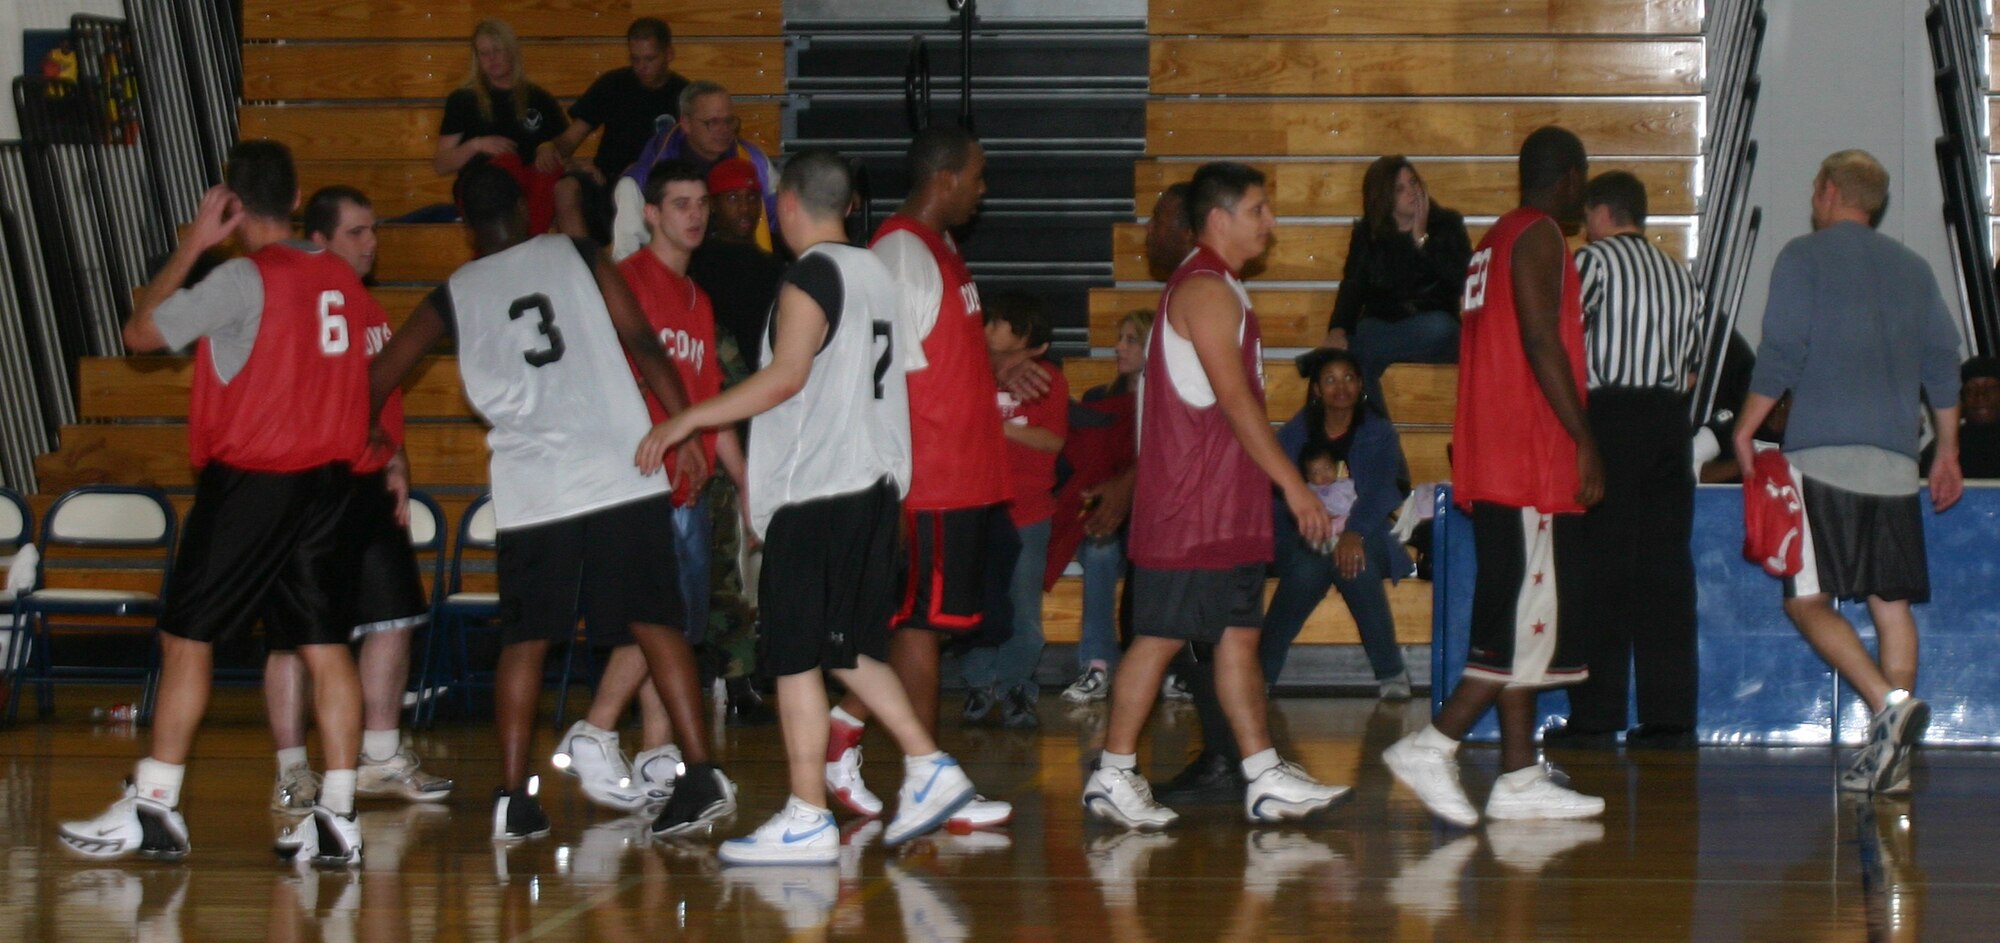 Members of the 82nd Contracting Squadron and 82nd Medical Operations Squadron intramural basketball teams congratulate each other after their game Jan. 8. The 82nd CONS won 67-30, taking their record to 5-0.